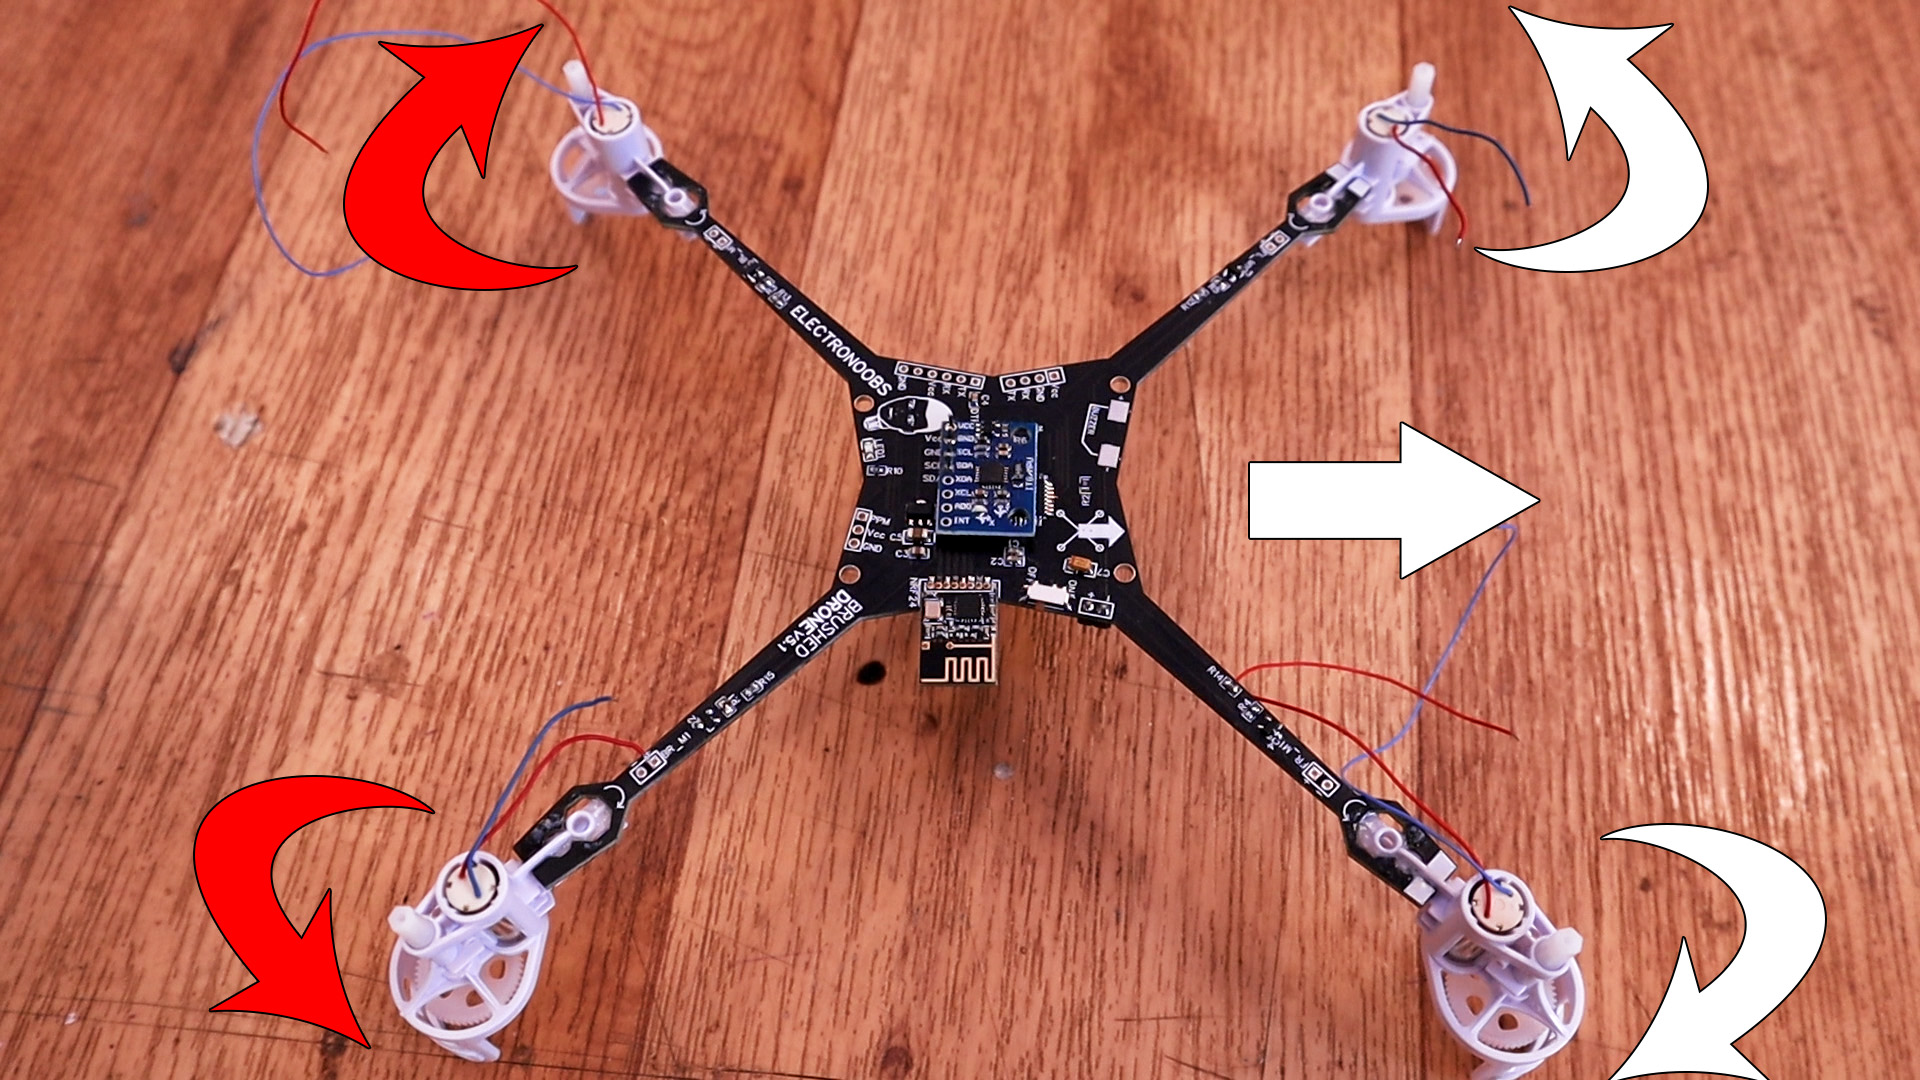 Arduino multiwii drone propeller connection